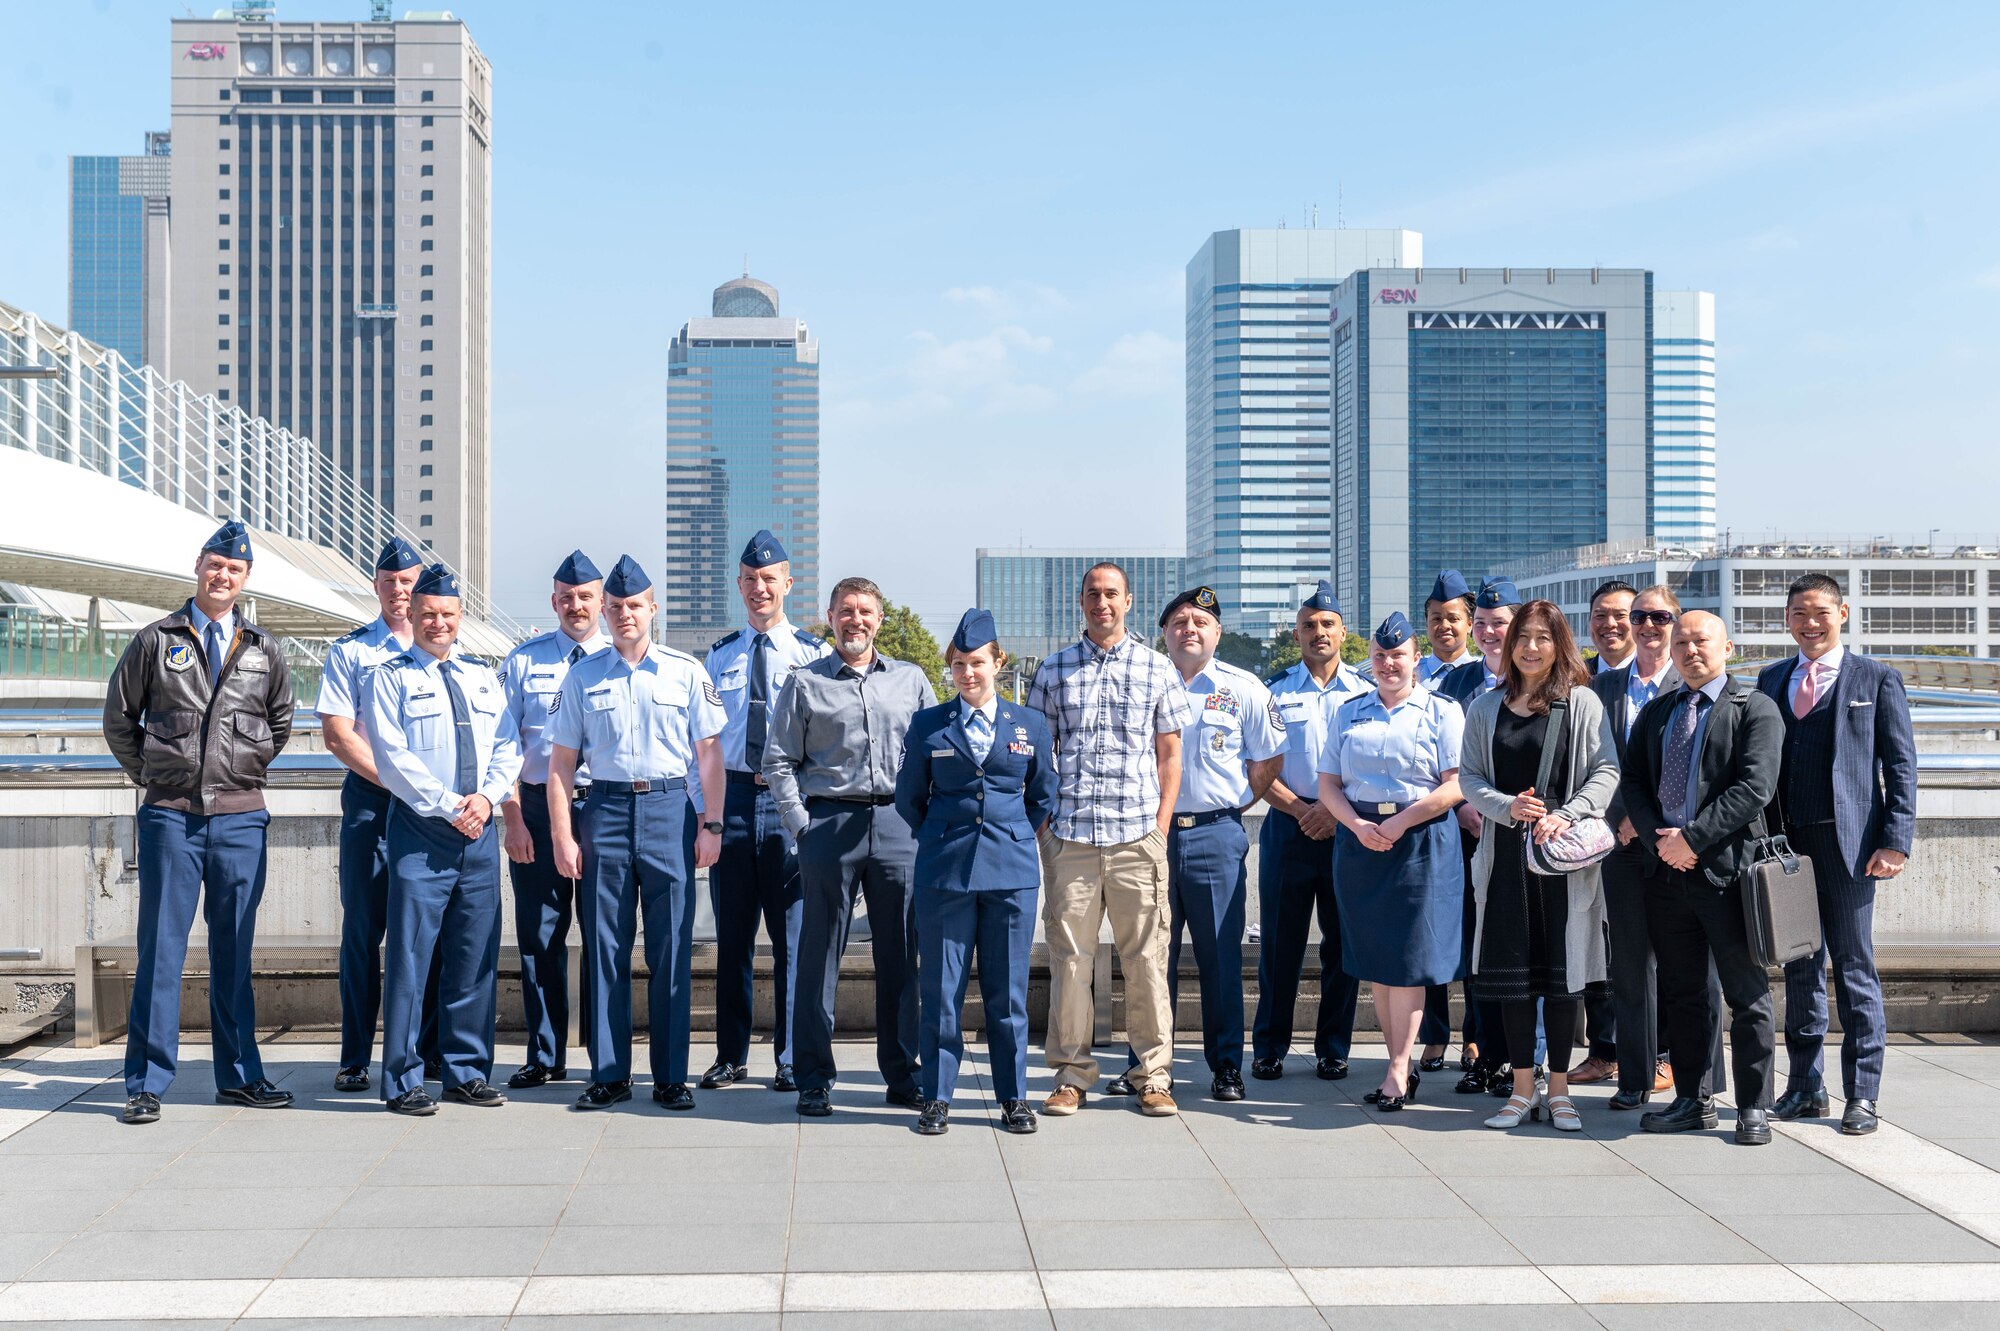 Nineteen people pose for a group photo with the Tokyo skyline in the background.